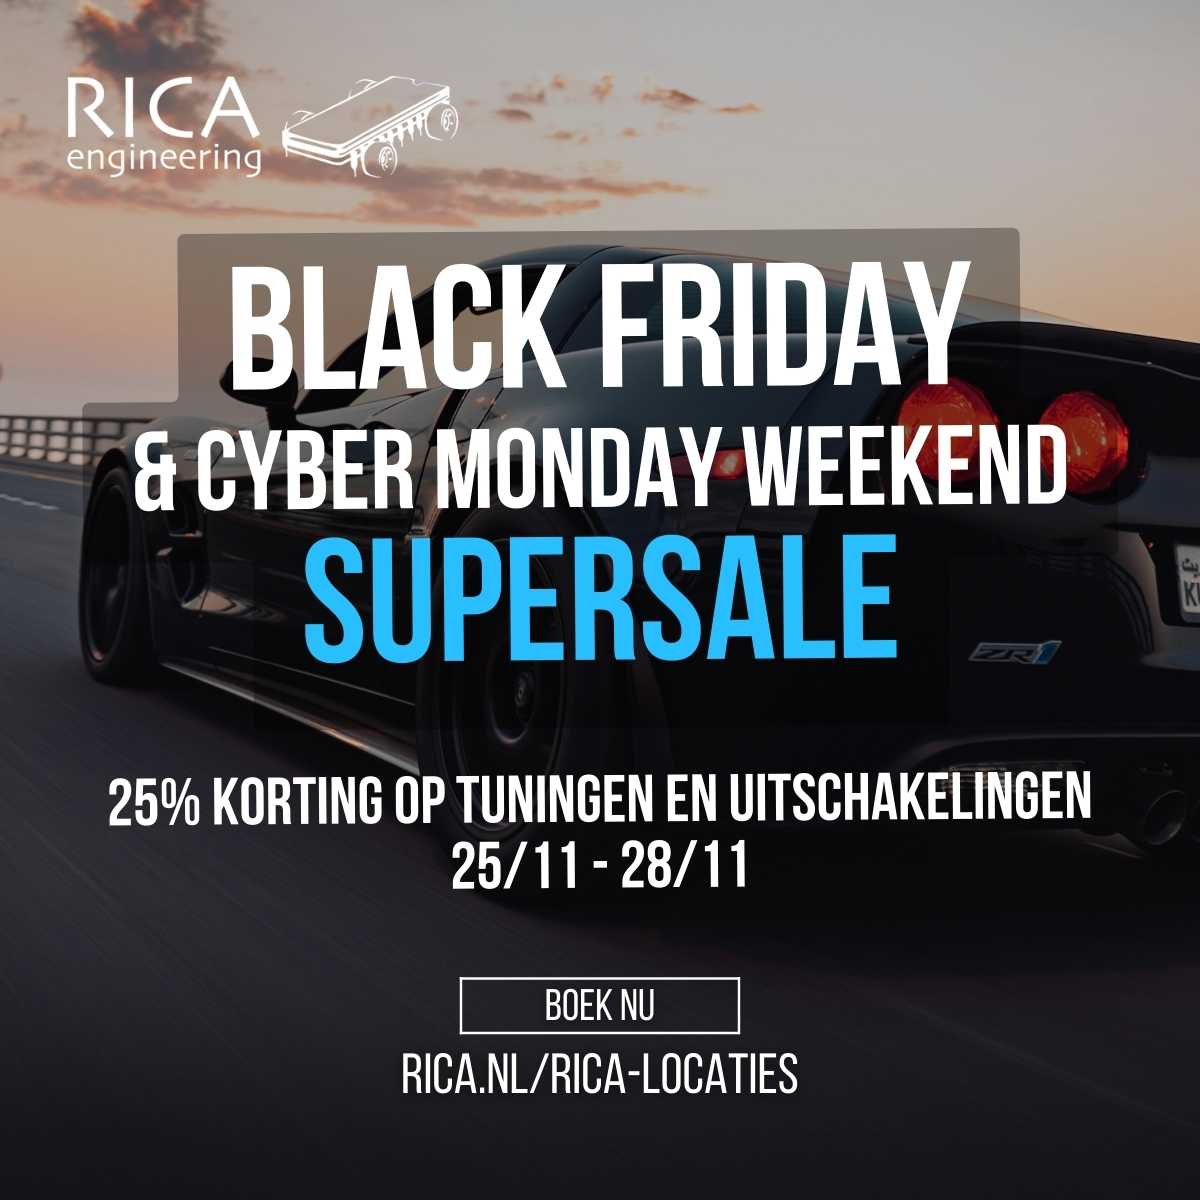 promo post black friday black car with text overlay deal details 20% discount